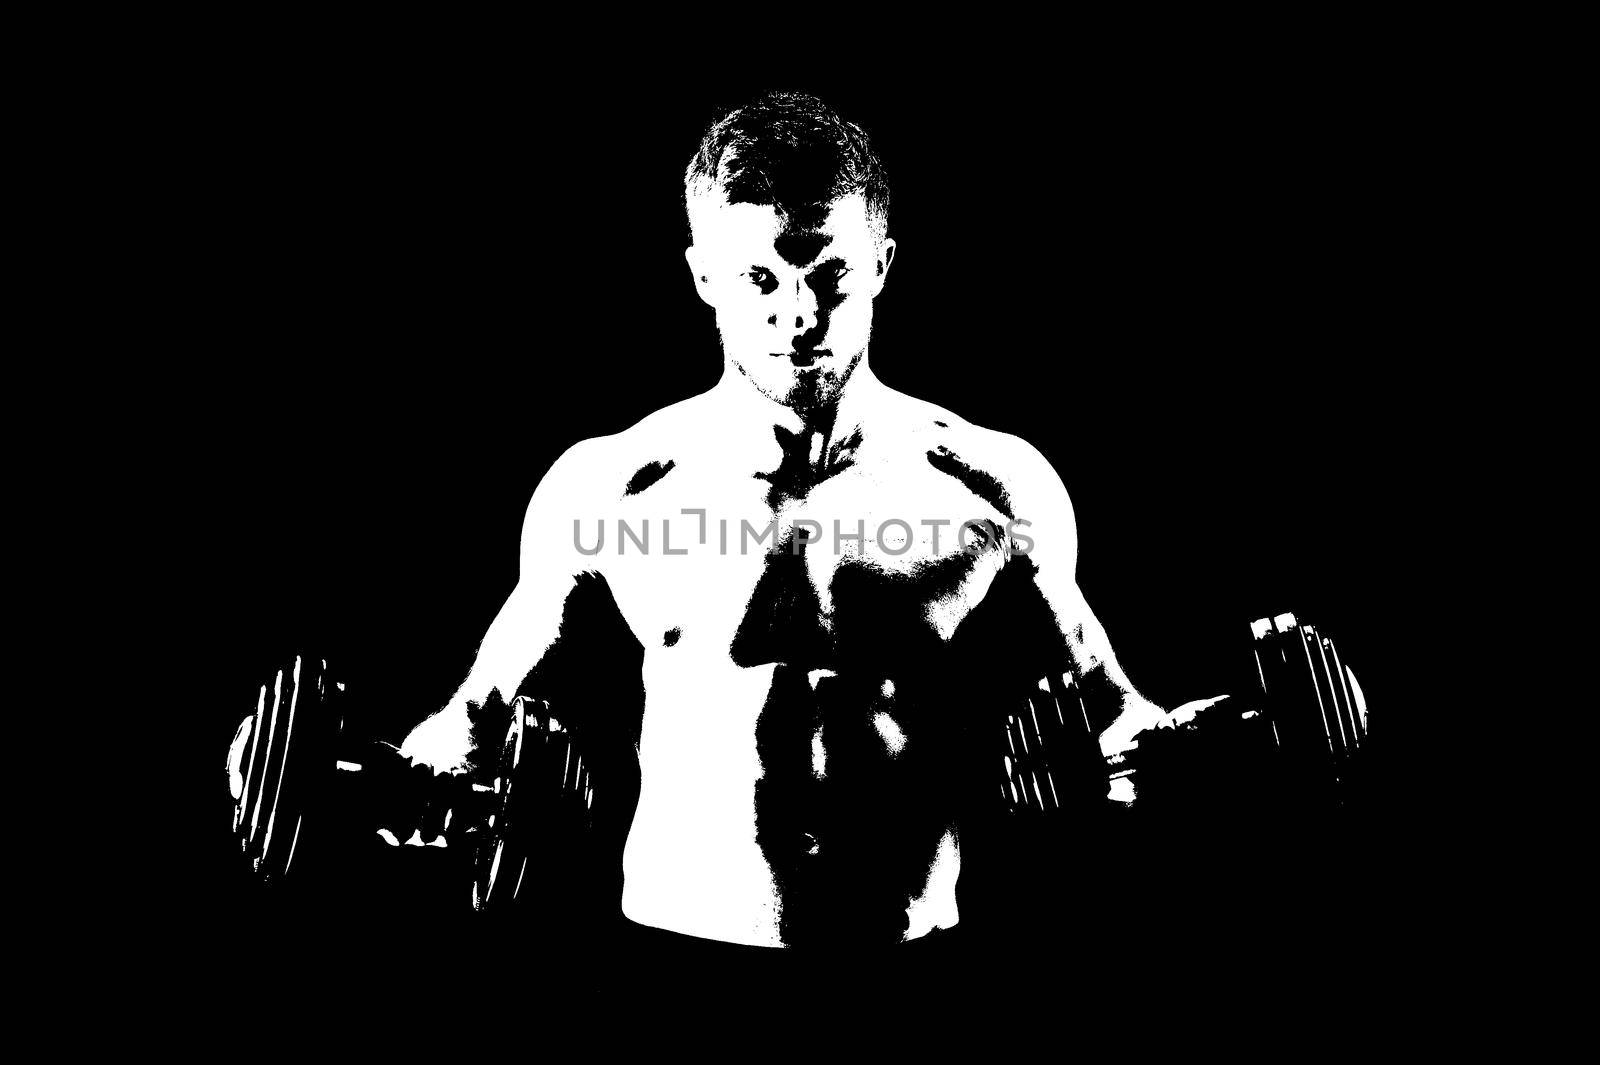 Black and white illustration of a shirtless muscular male bodybuilder lifting heavy dumbbells fitness gym motivation determination exercising training power strength brutality sports health people.